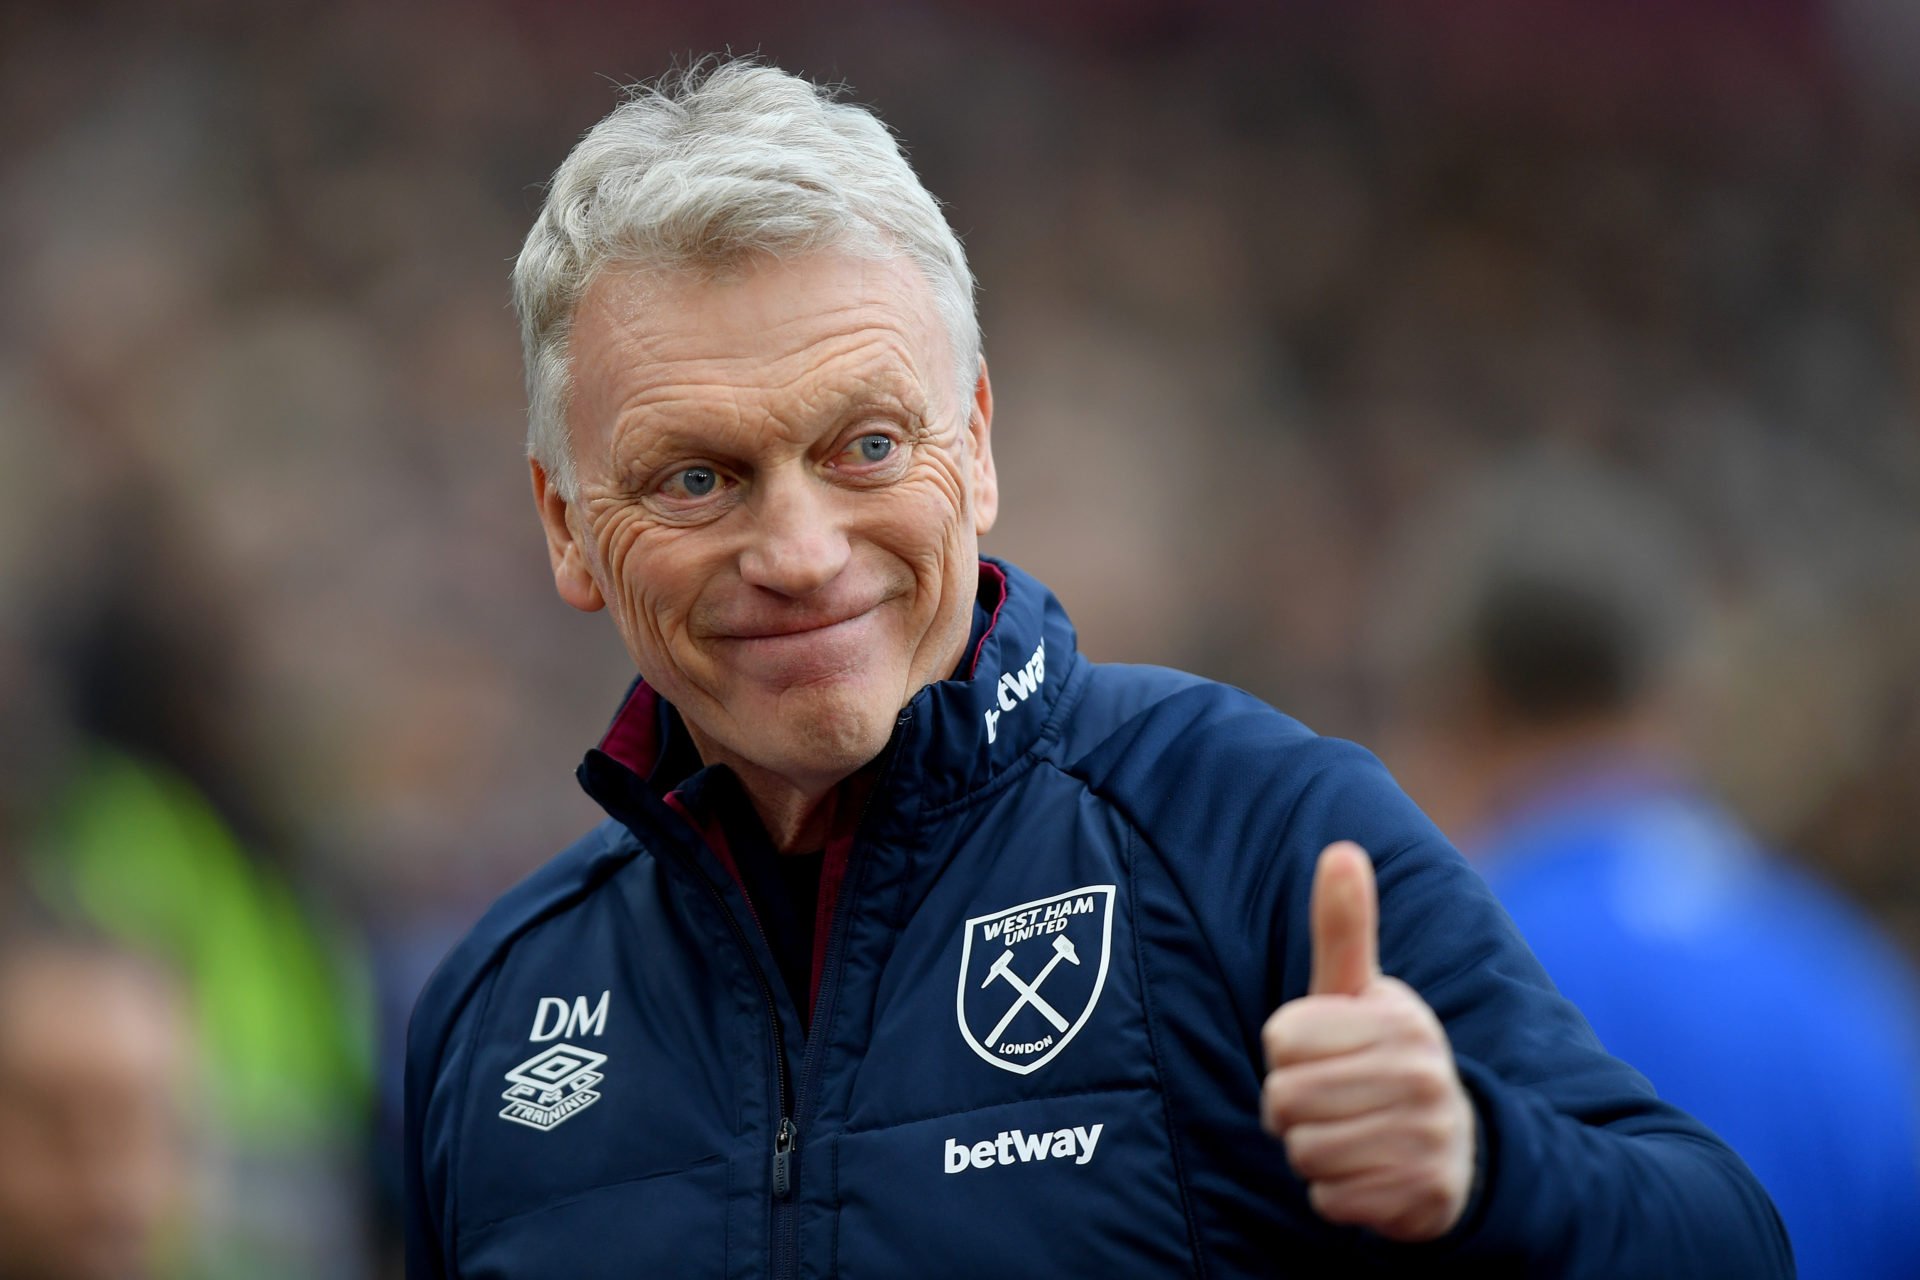 Forget the cup West Ham have just had a major double boost